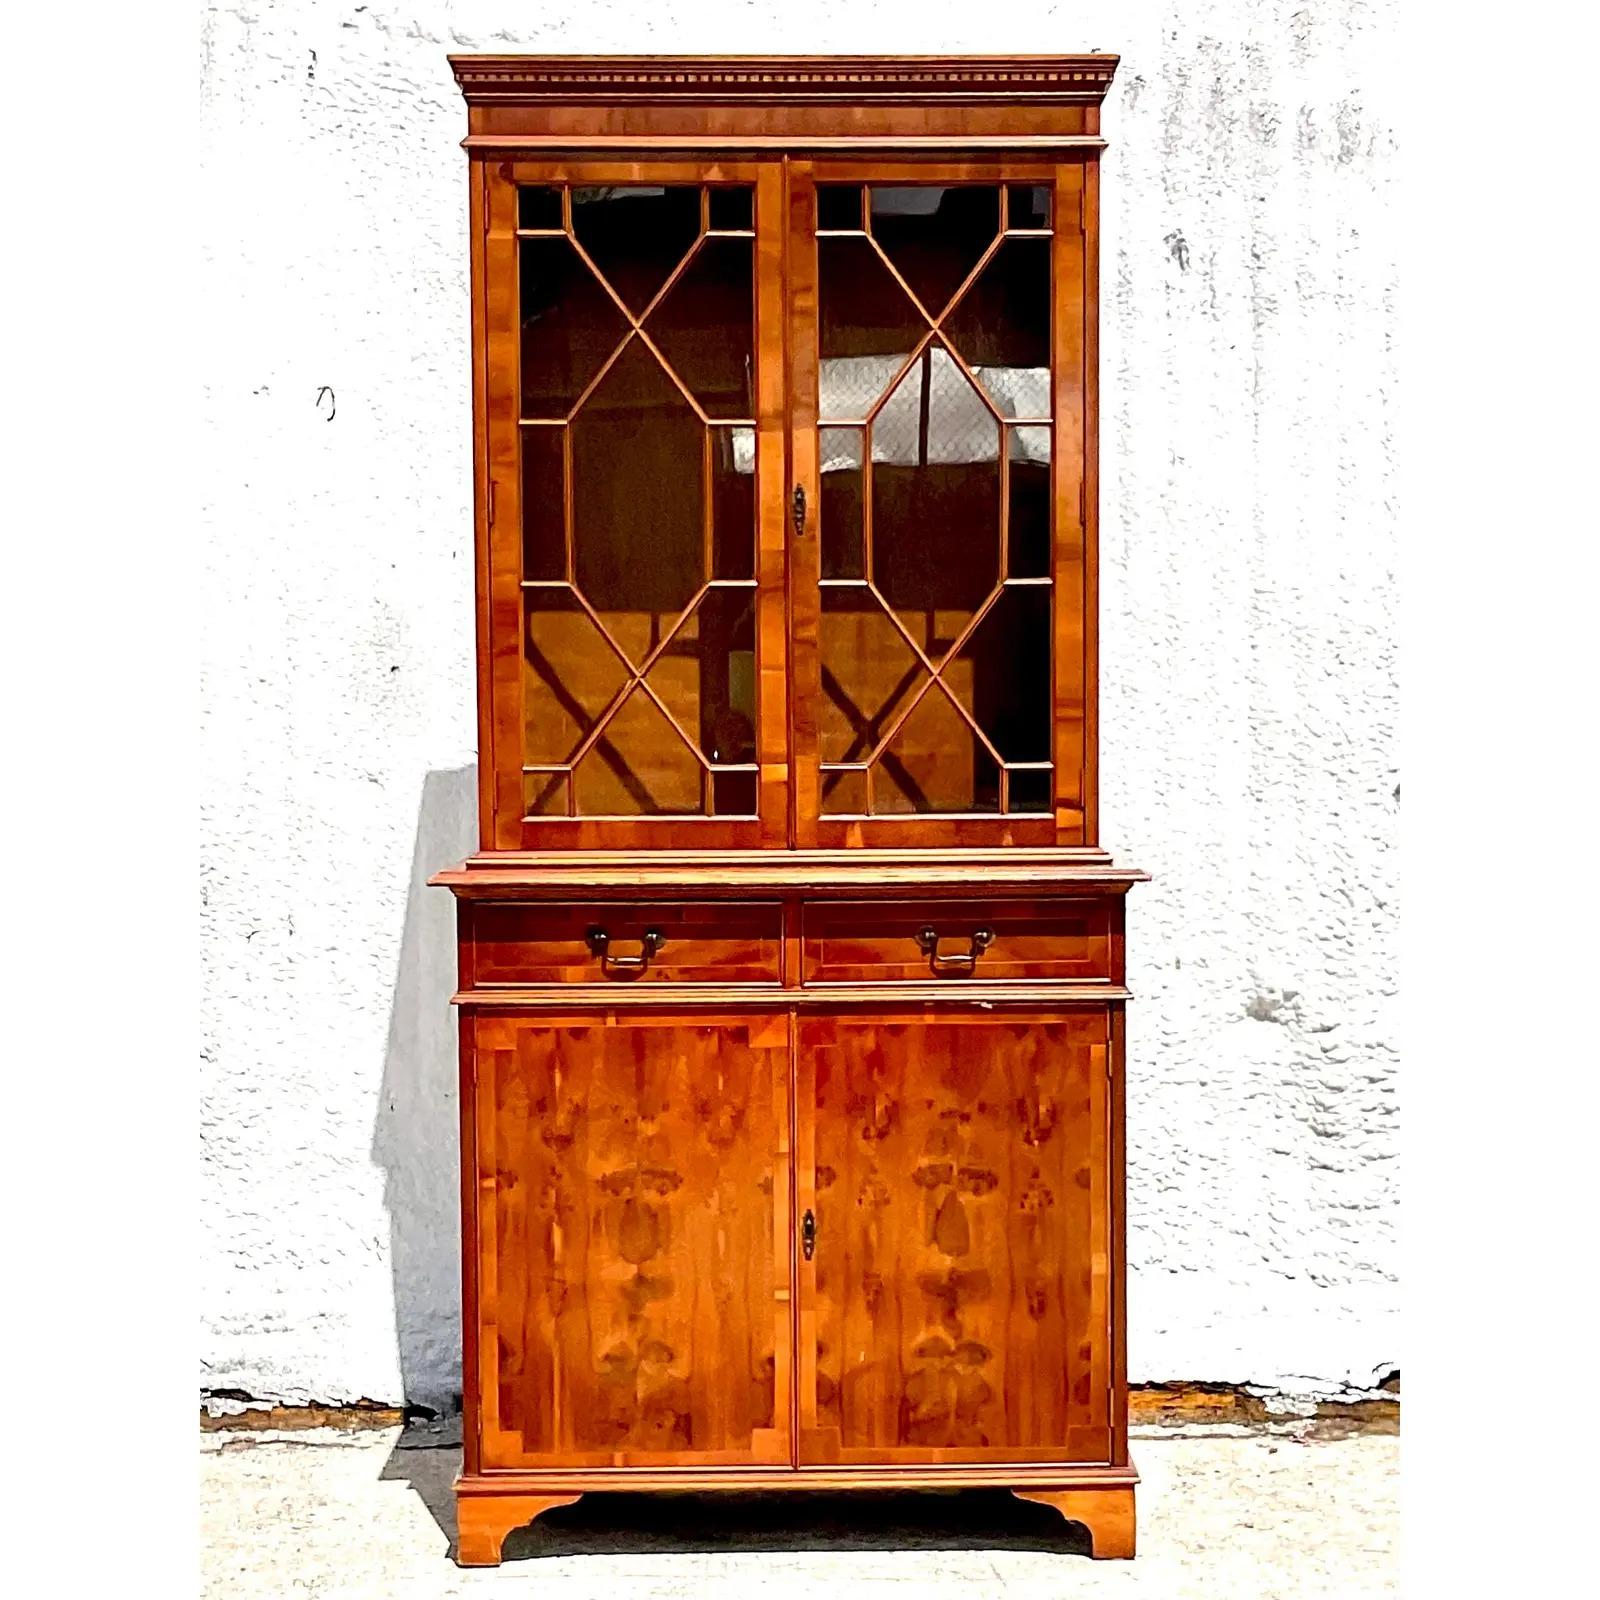 Vintage Regency flame mahogany display cabinet. Incredible wood grain detail with classic mullion detail on the glass doors. Lots of great storage below. Acquired from a Palm Beach estate.